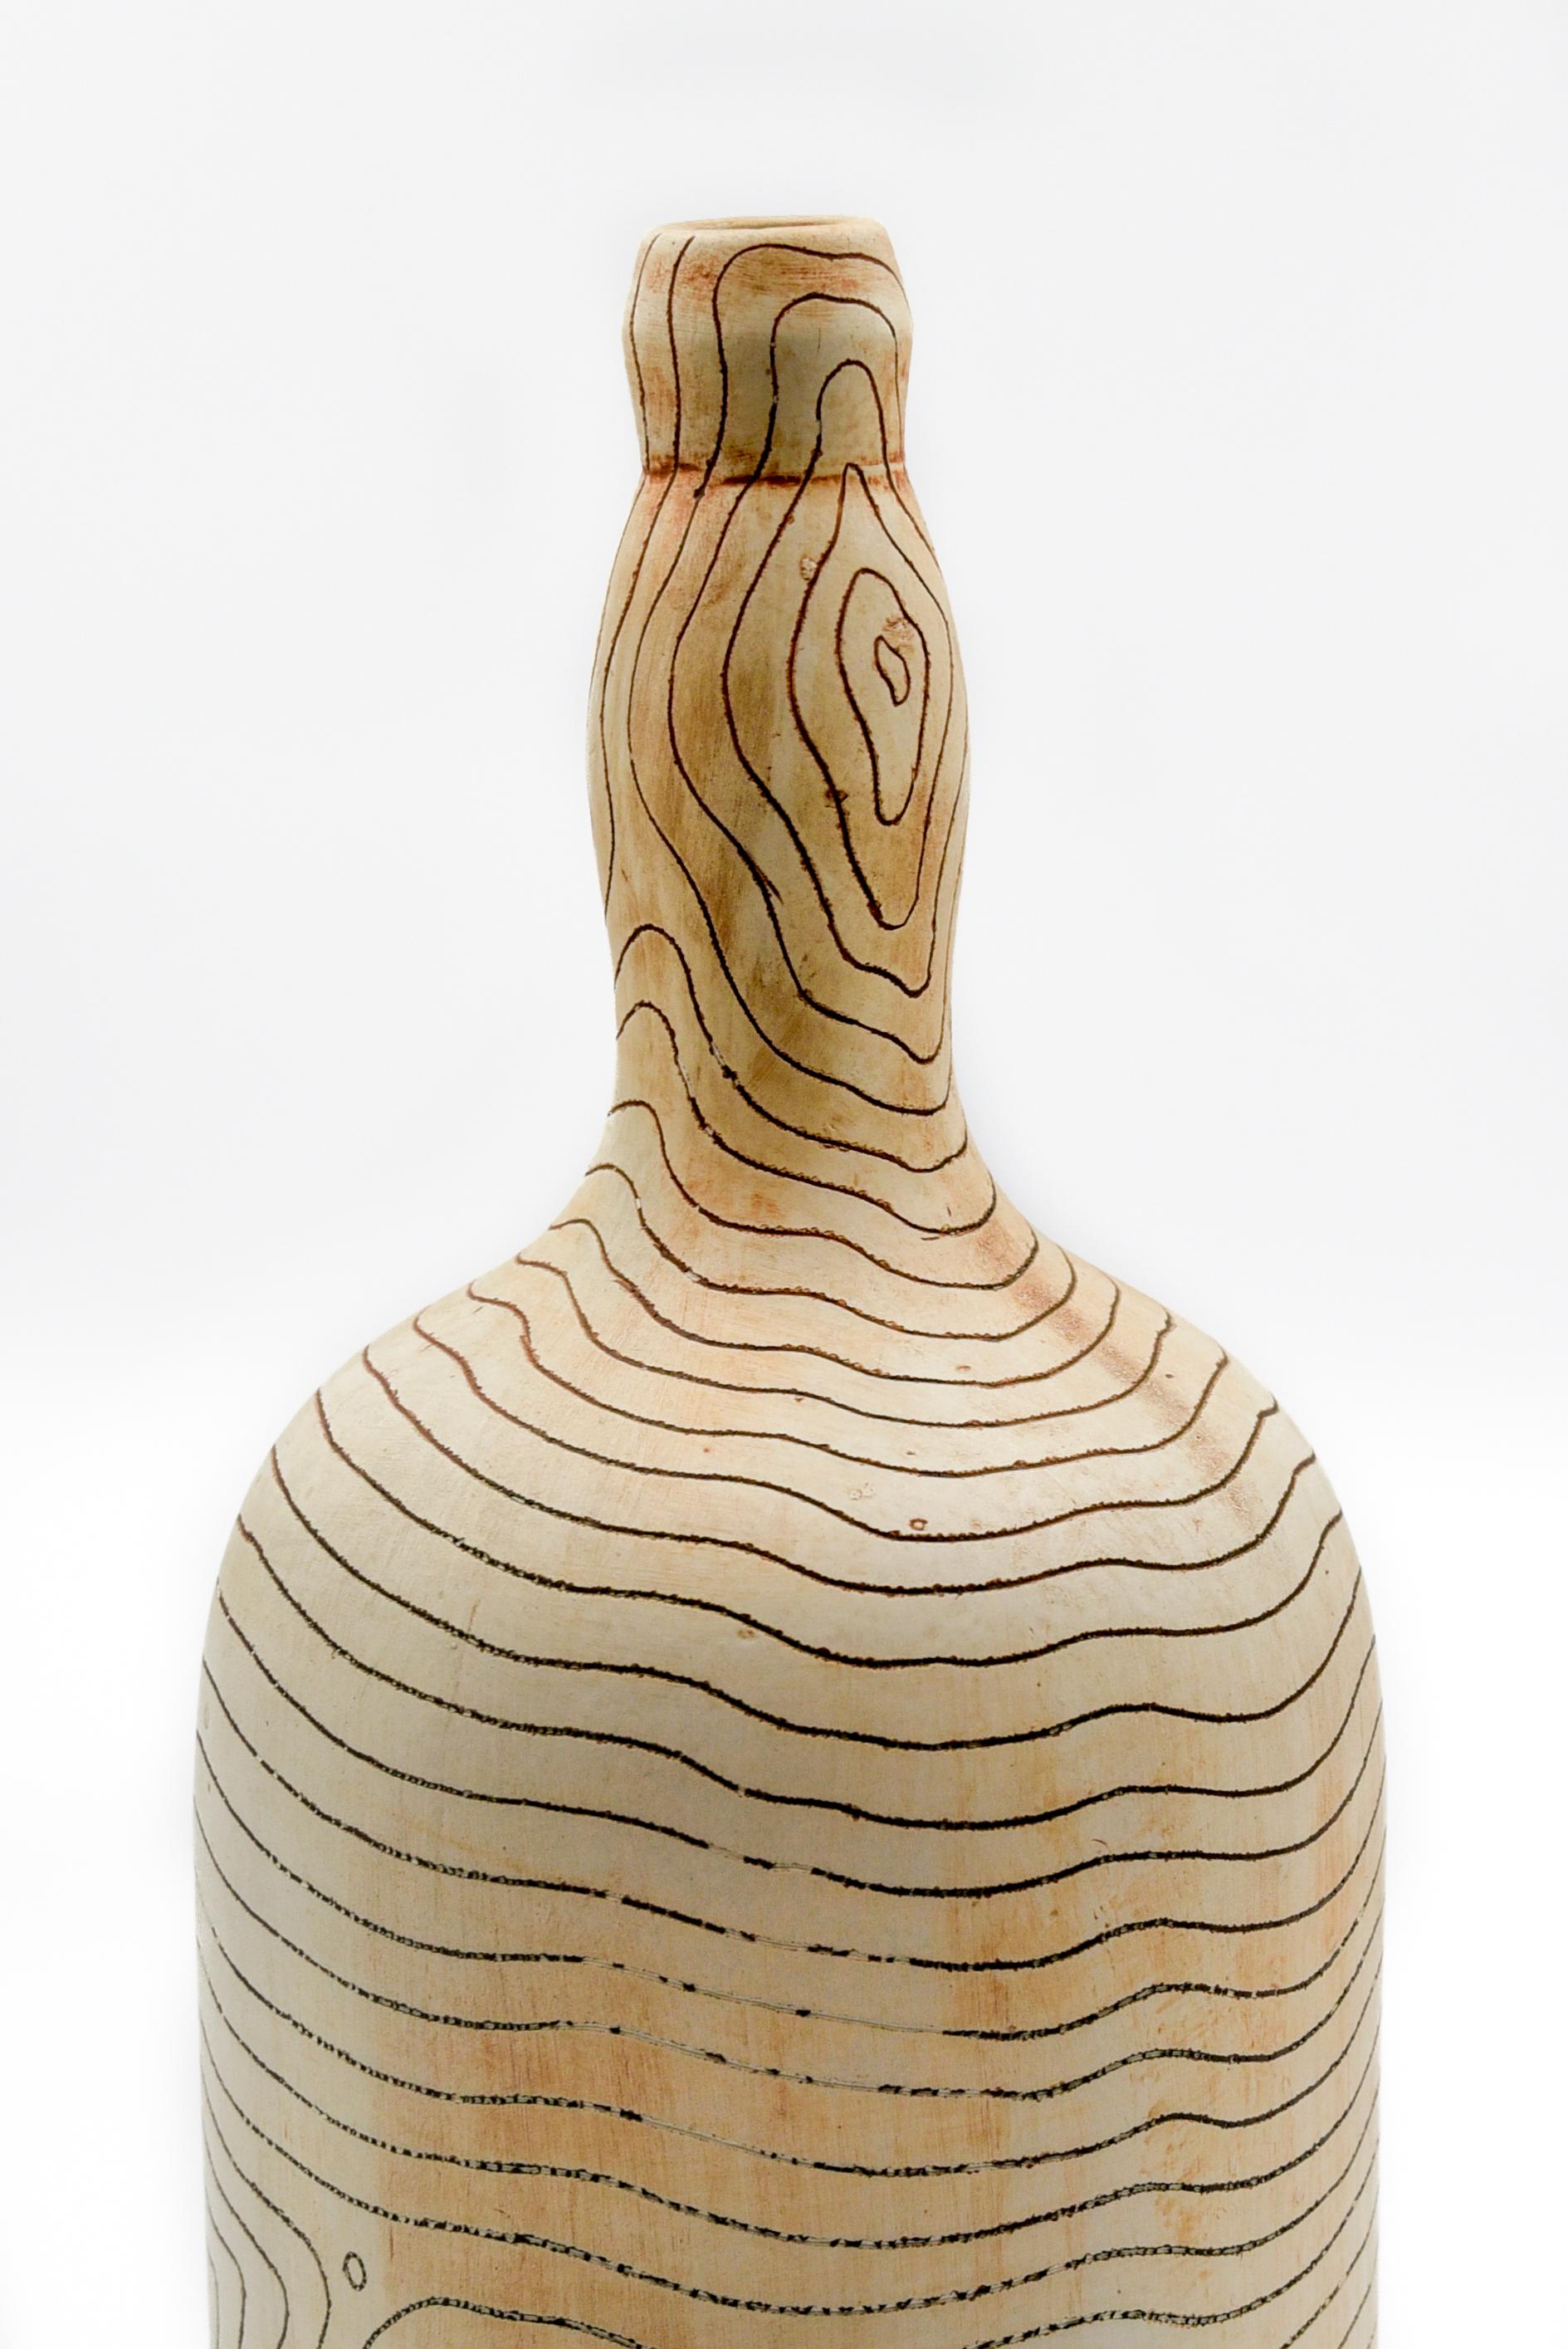 which clay is used for bottle art